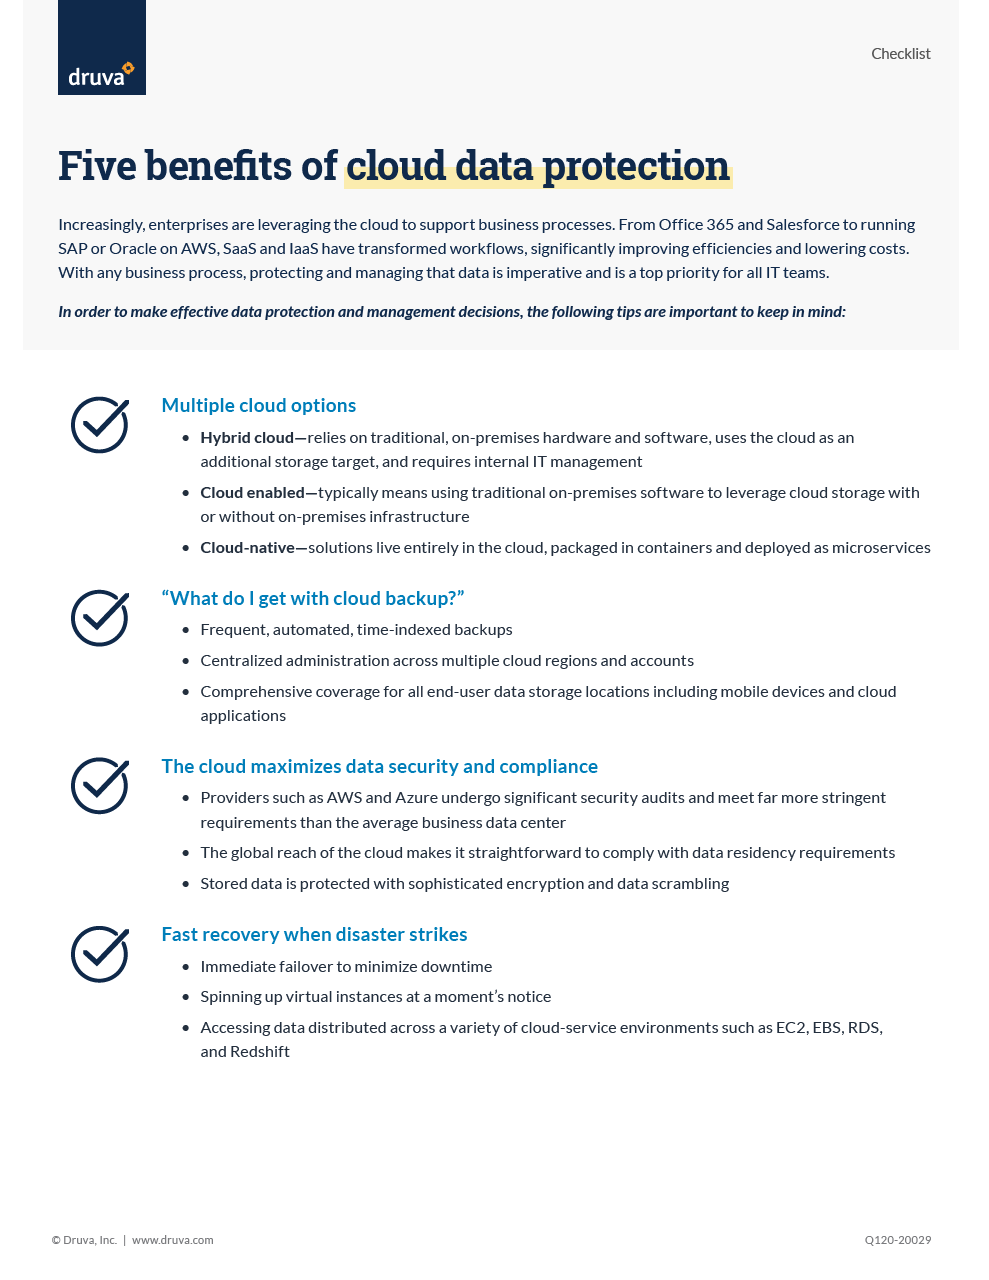 Five benefits of cloud data protection